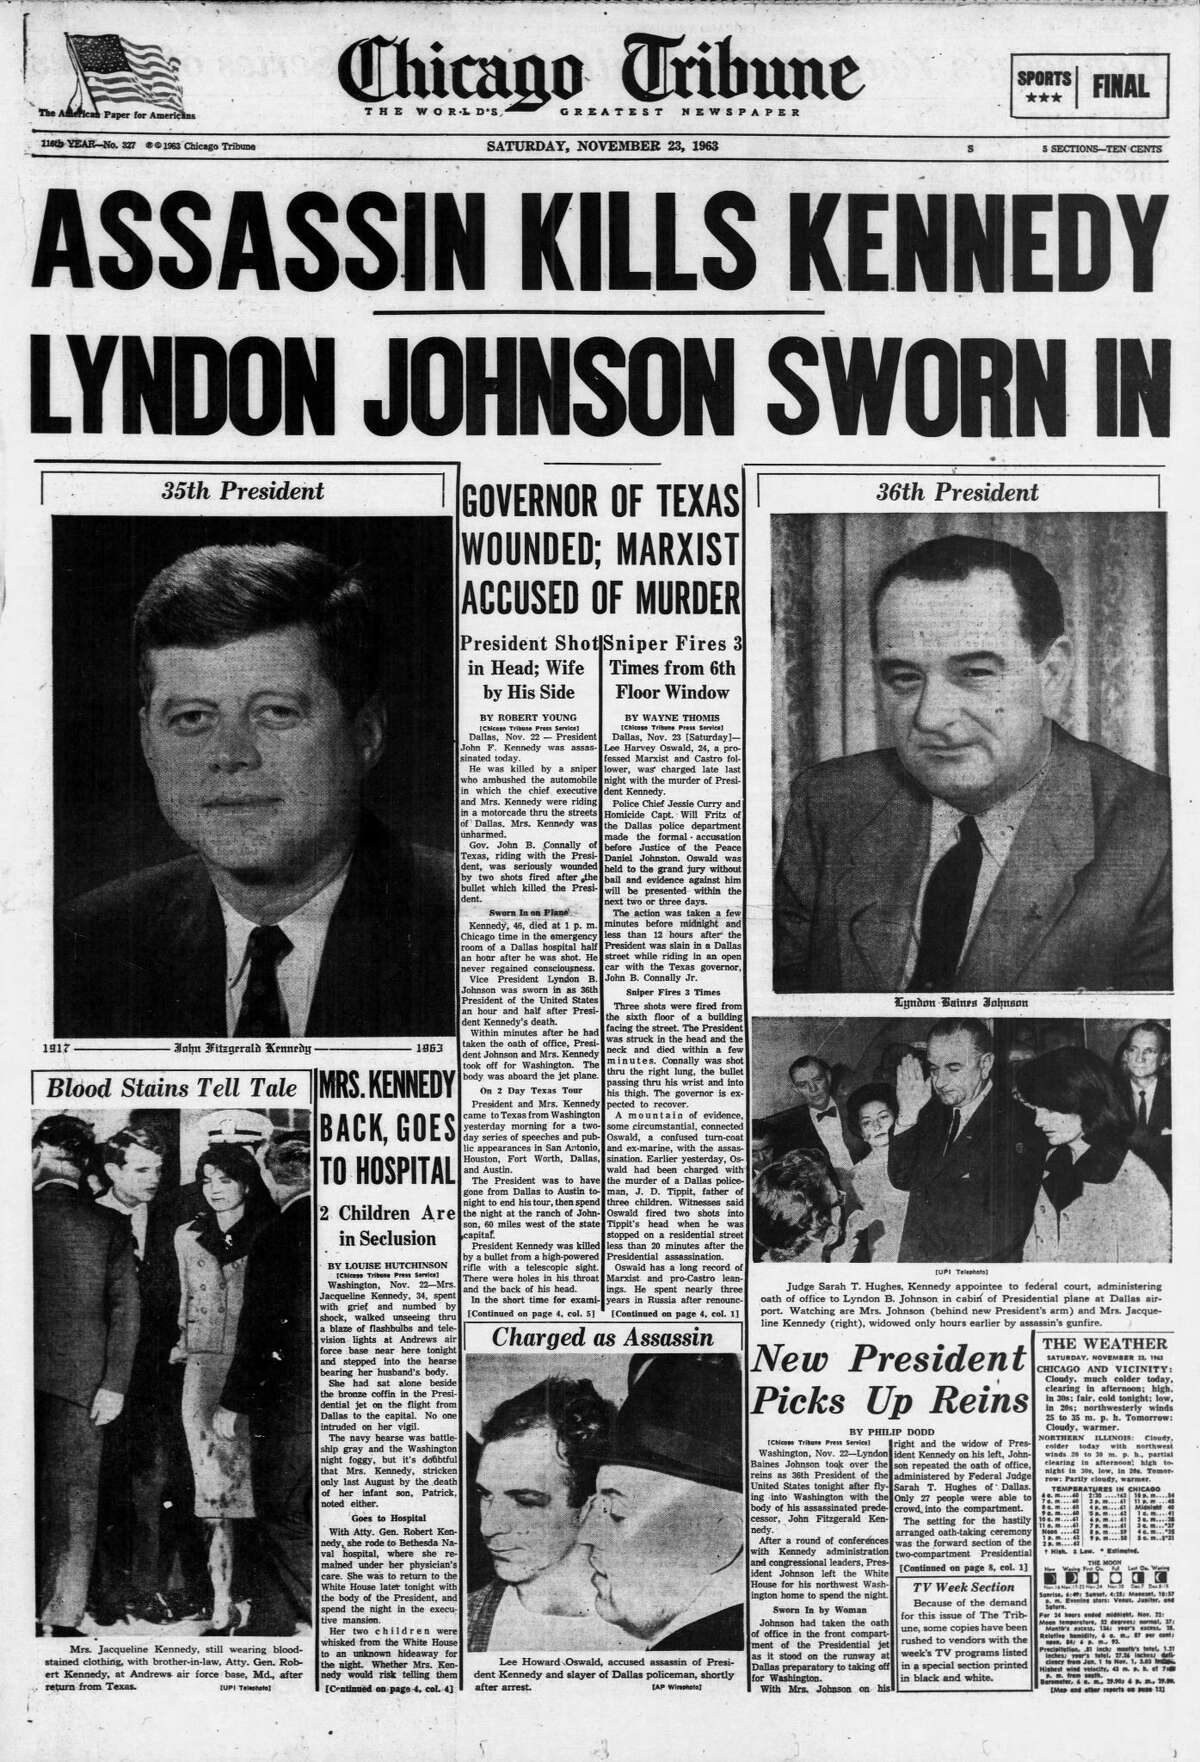 10 front pages from JFK's assassination